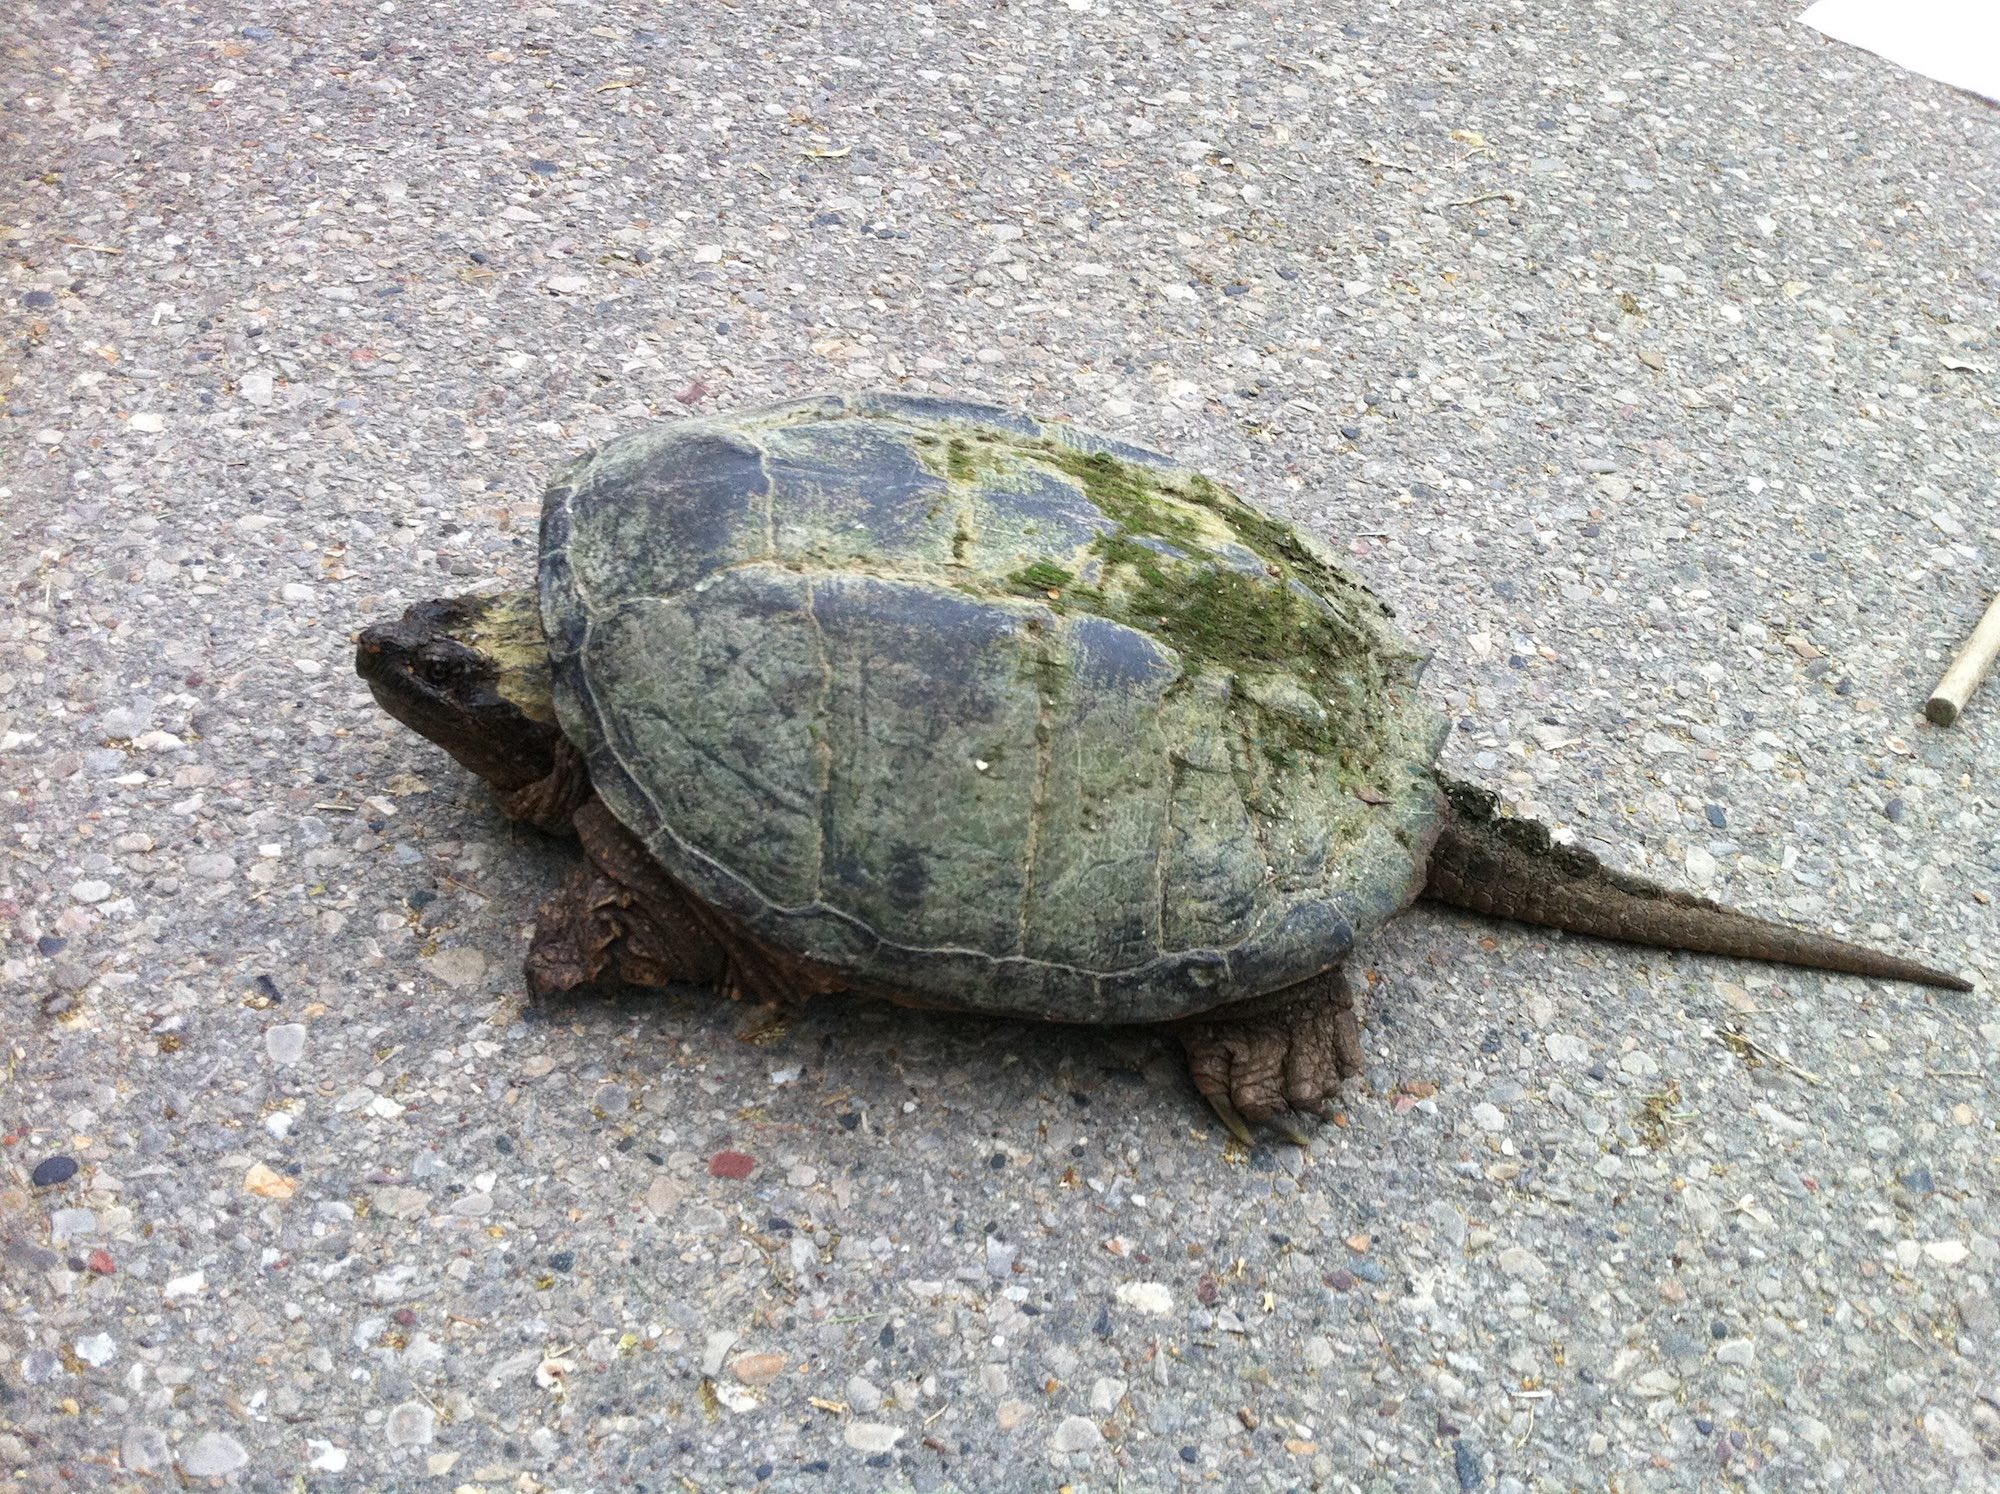 Snapping Turtle on Arbor Drive across from Ho-Nee-Um Pond on Lake Wingra in Madison, Wisconsin on June 5, 2015.